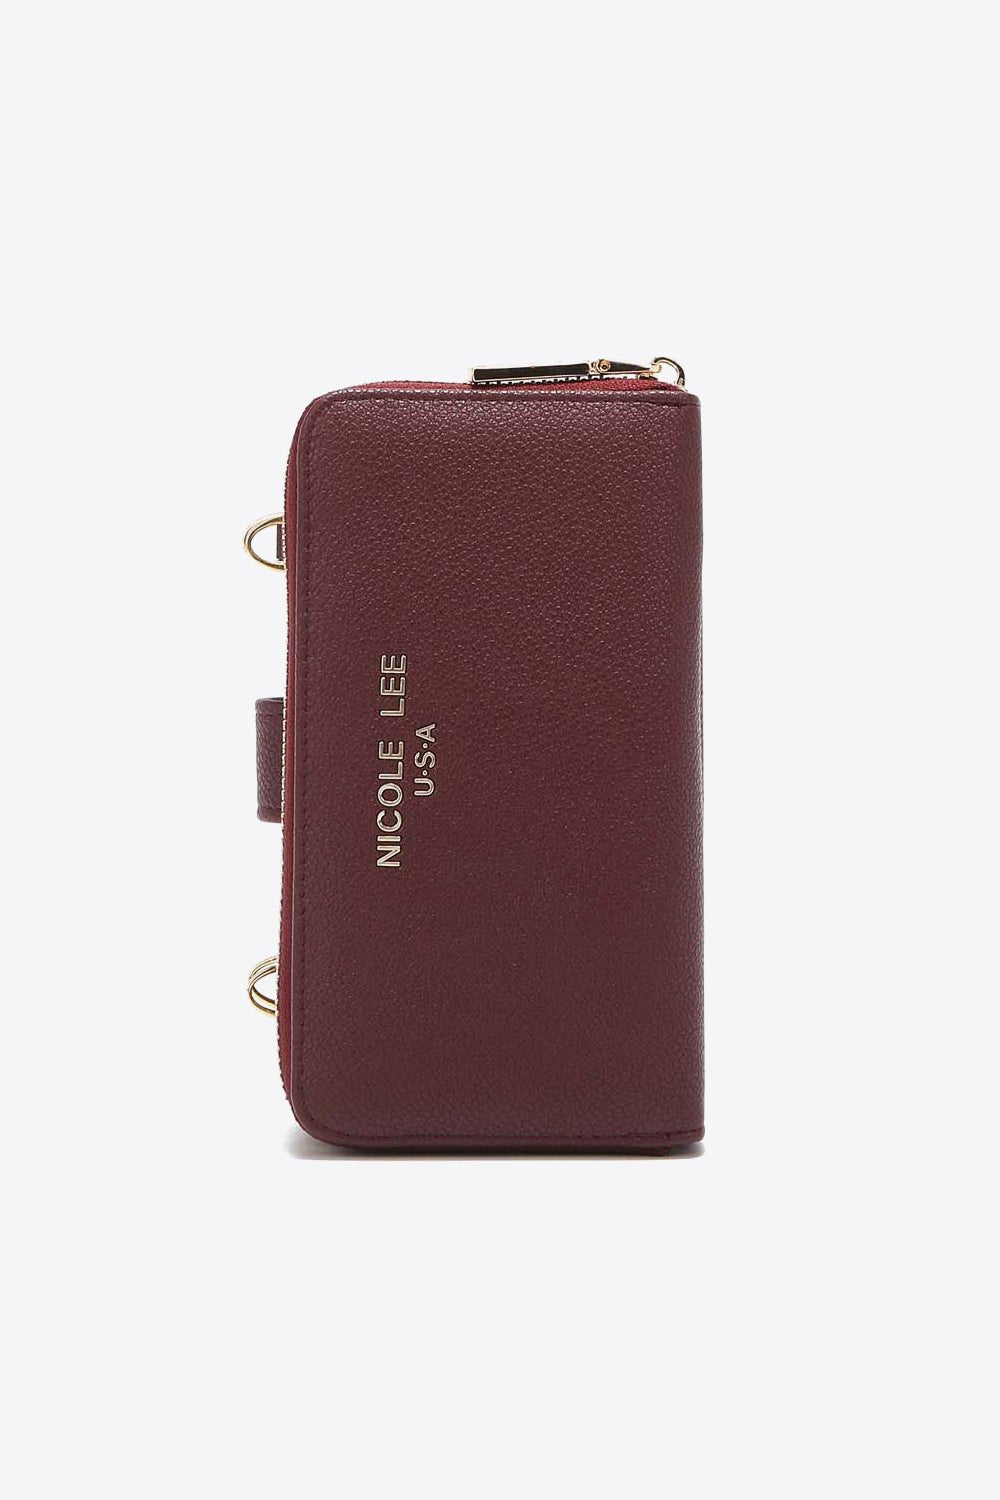 Nicole Lee USA Two - Piece Crossbody Phone Case Wallet - OMG! Rose